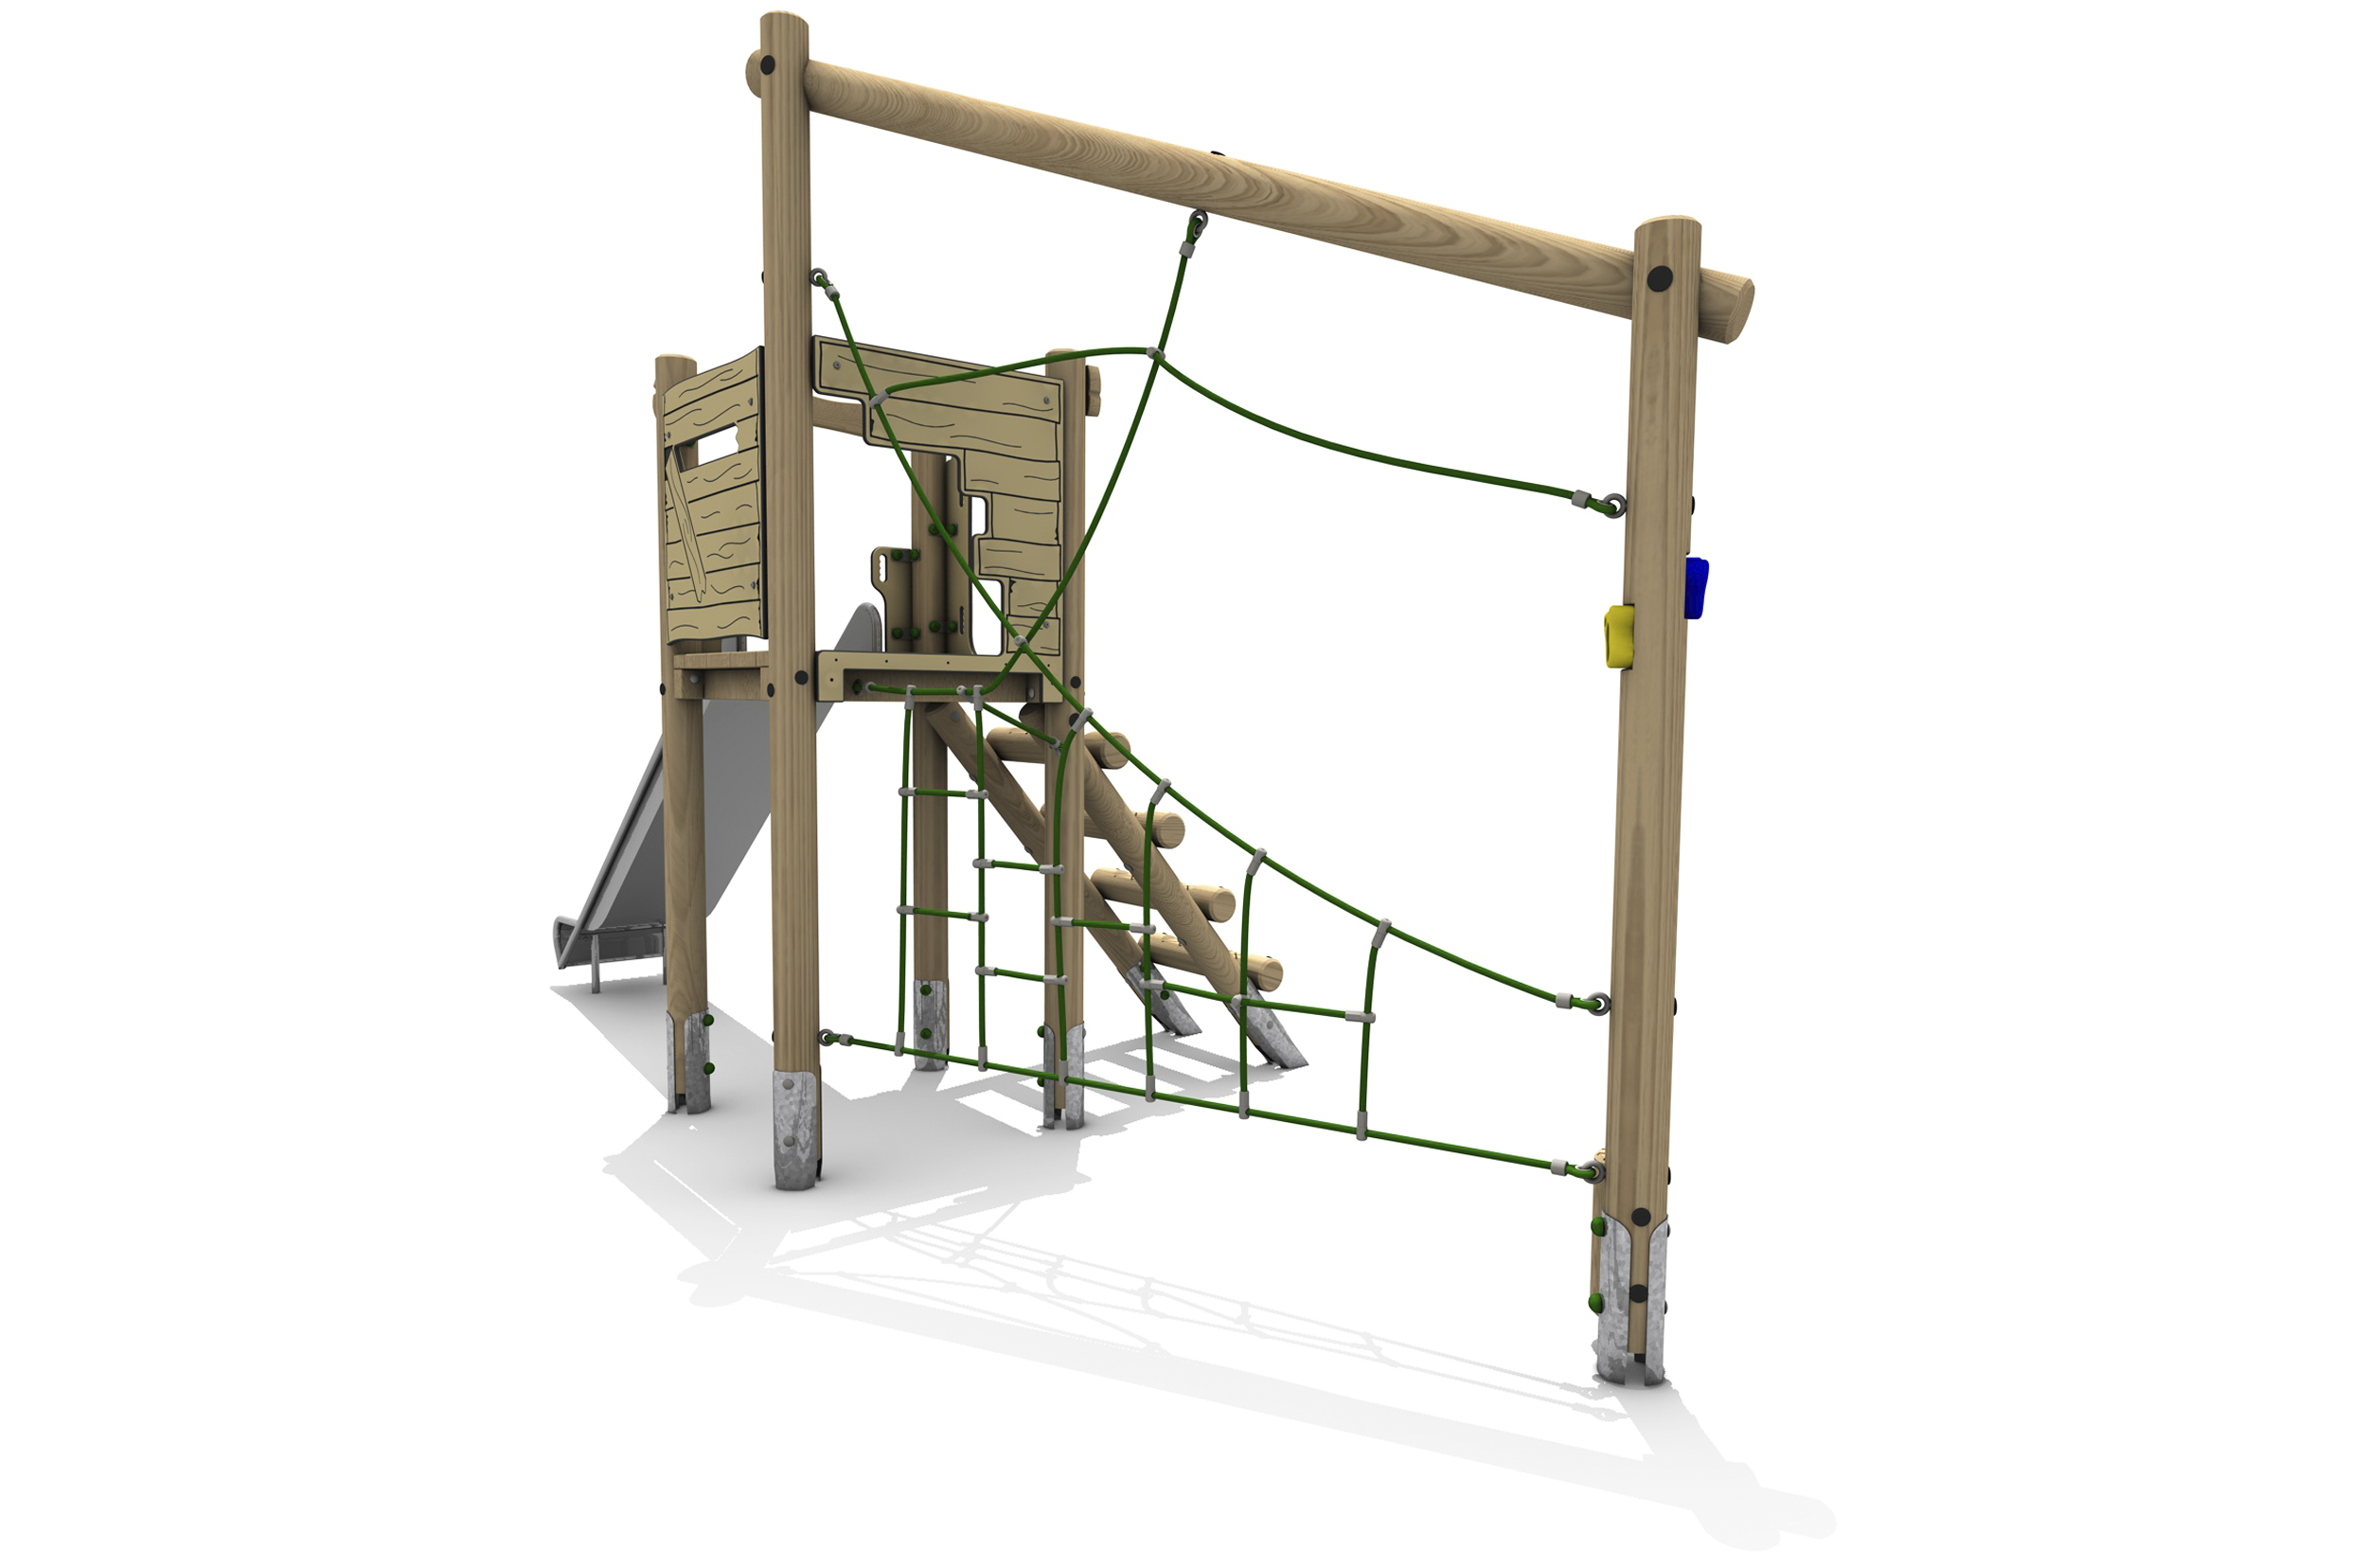 Timber Tower Single Deck 04, A timber tower climber with a large green traverse net leading to a central platform to access the slide